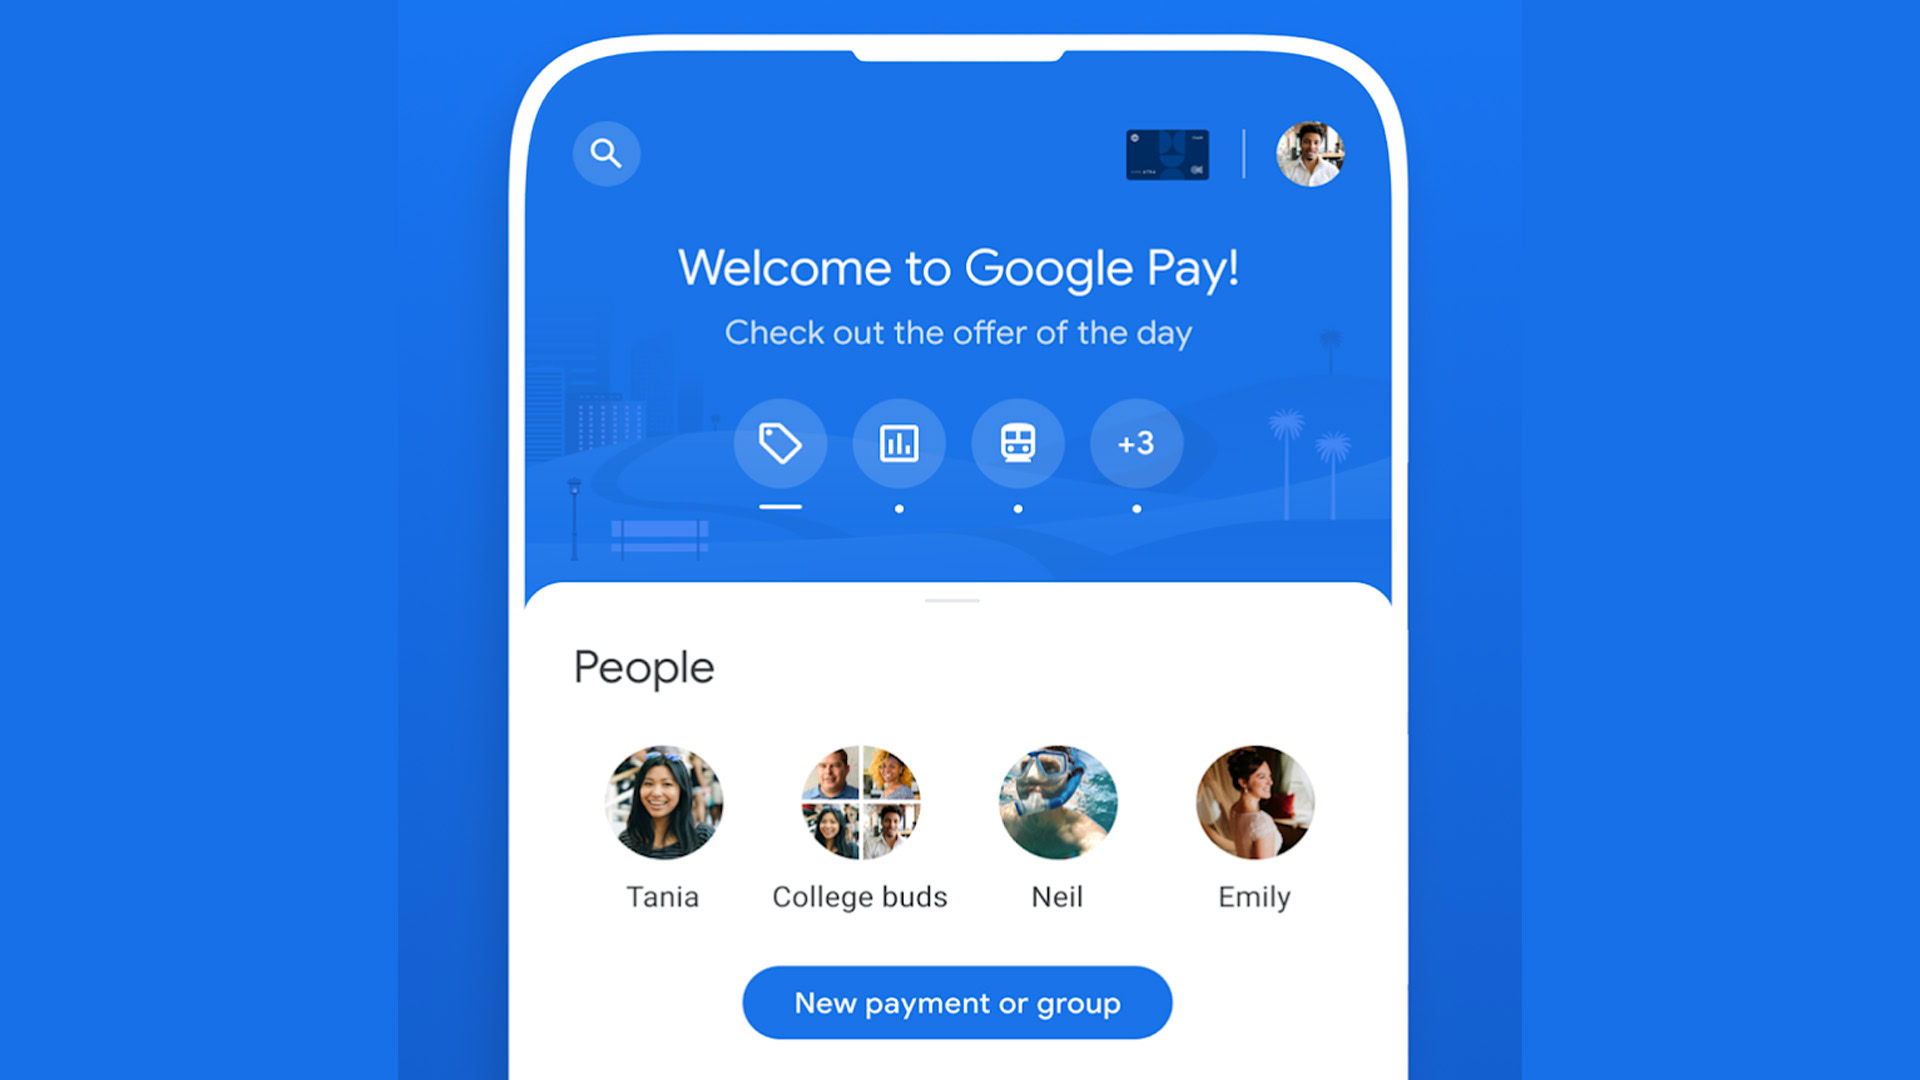 Best new Android apps - Google Pay screenshot 2021